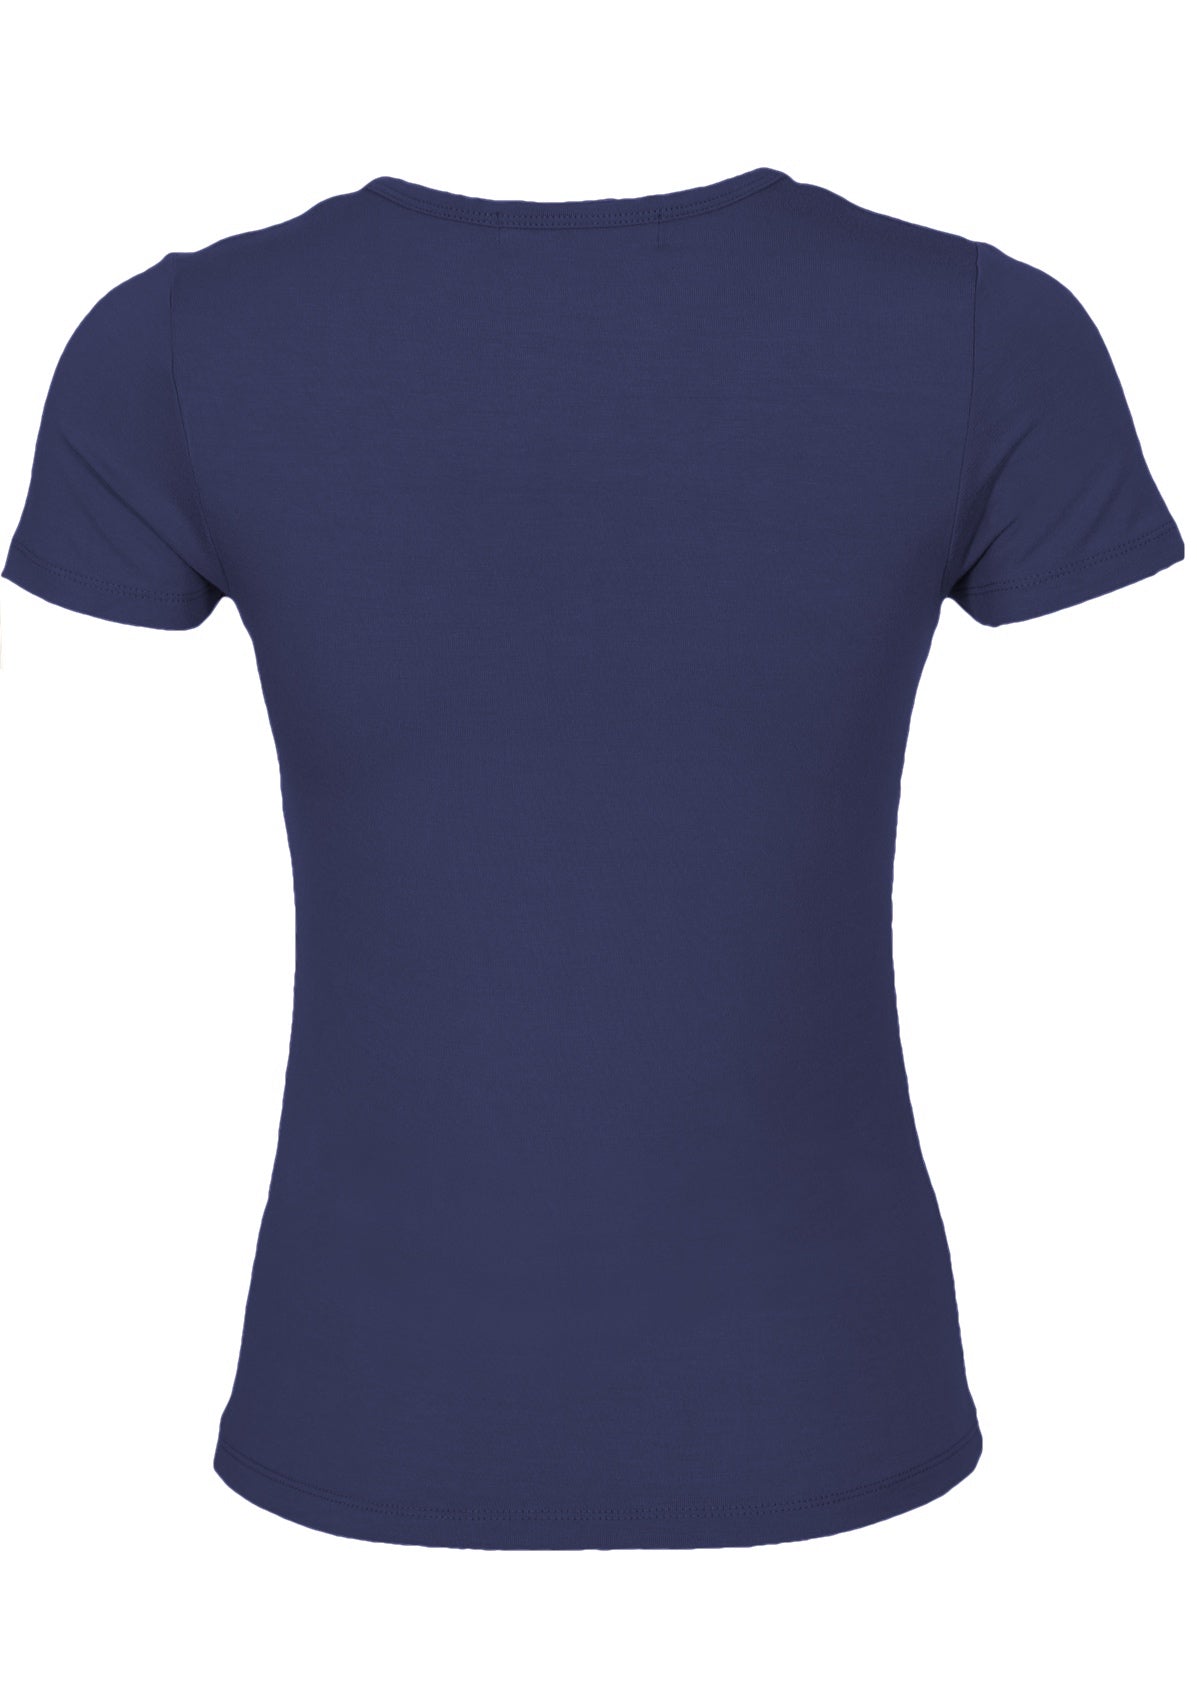 Back view women's scoop neck navy blue rayon fitted t-shirt.